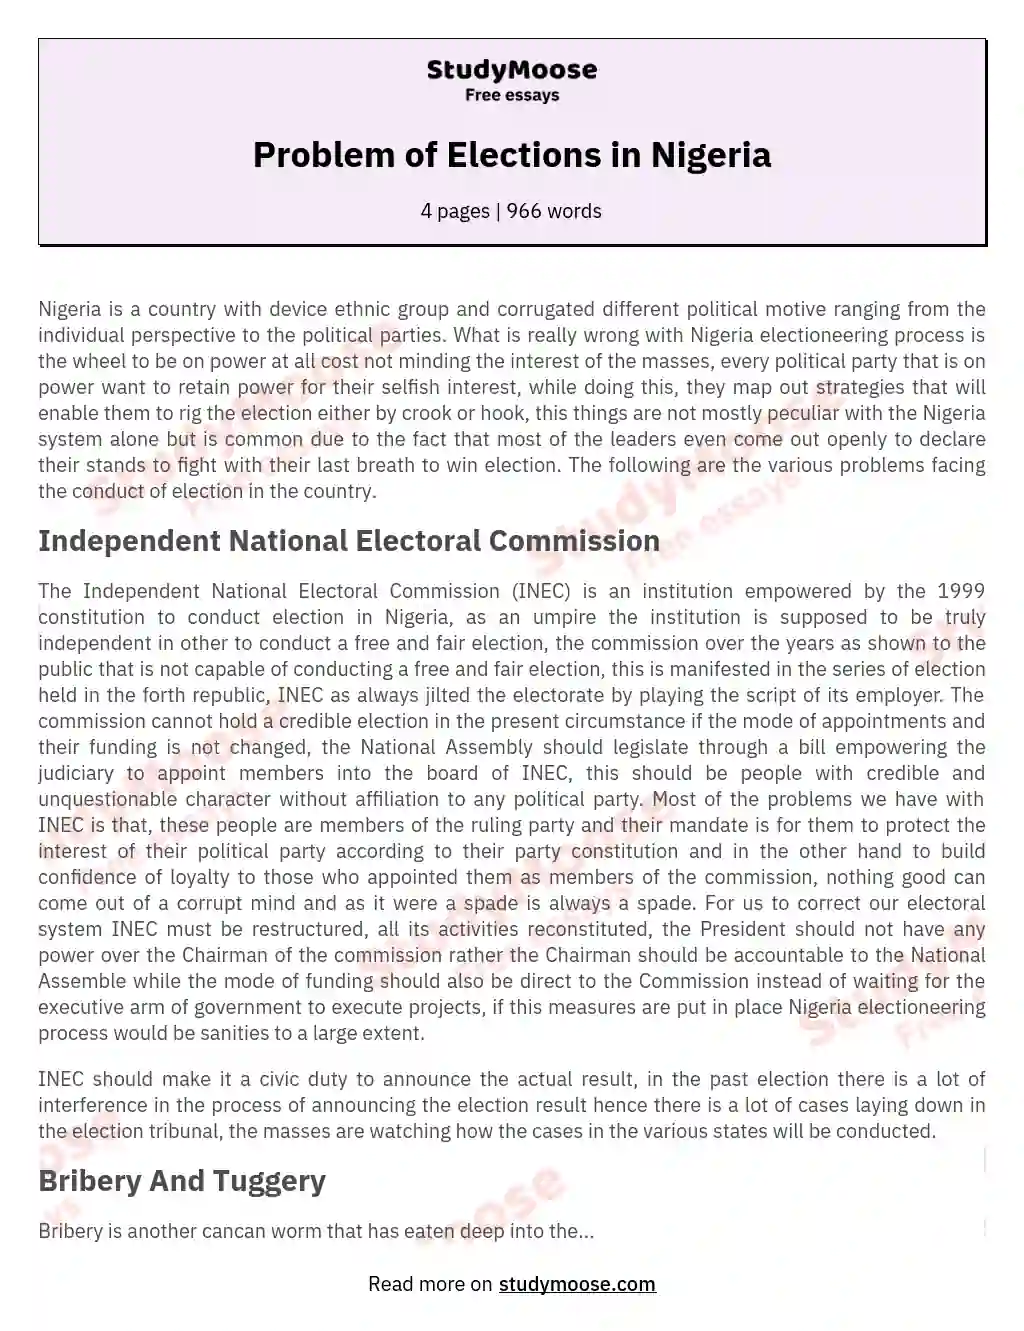 Problem of Elections in Nigeria essay